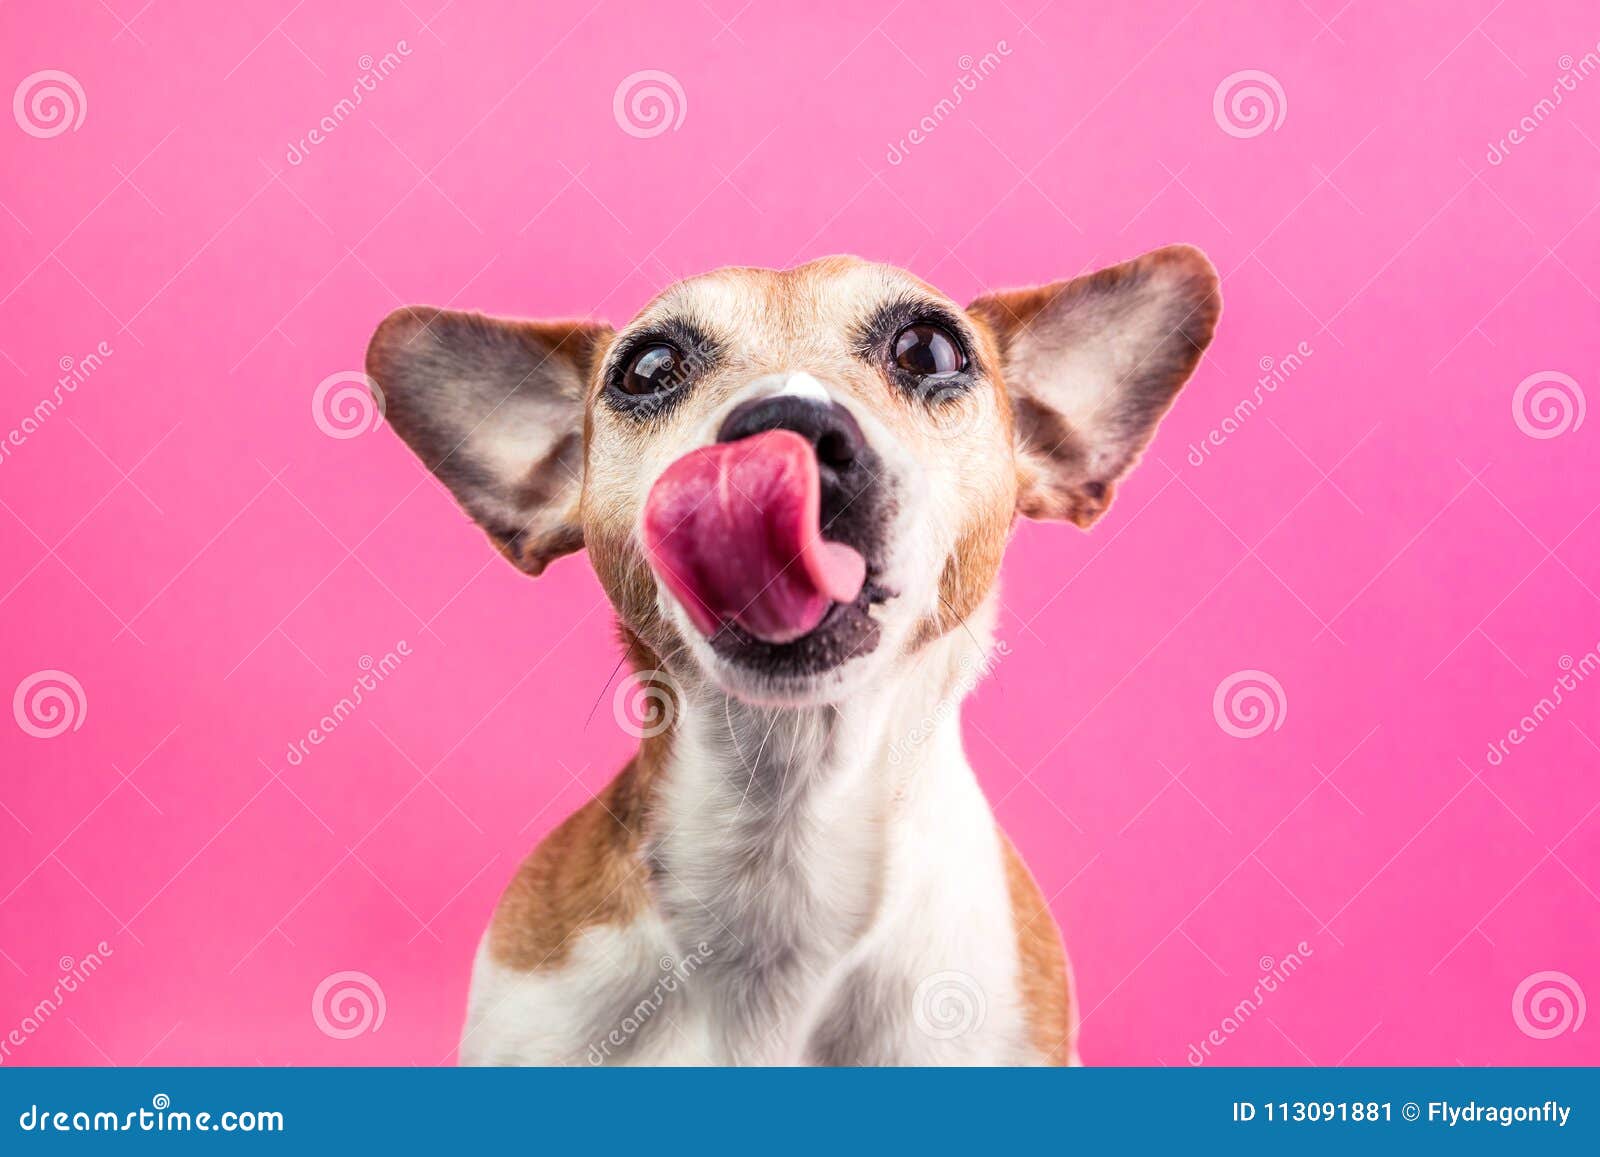 licking cute dog on pink background. hungry face. want delicious pet food. tasty lanch time